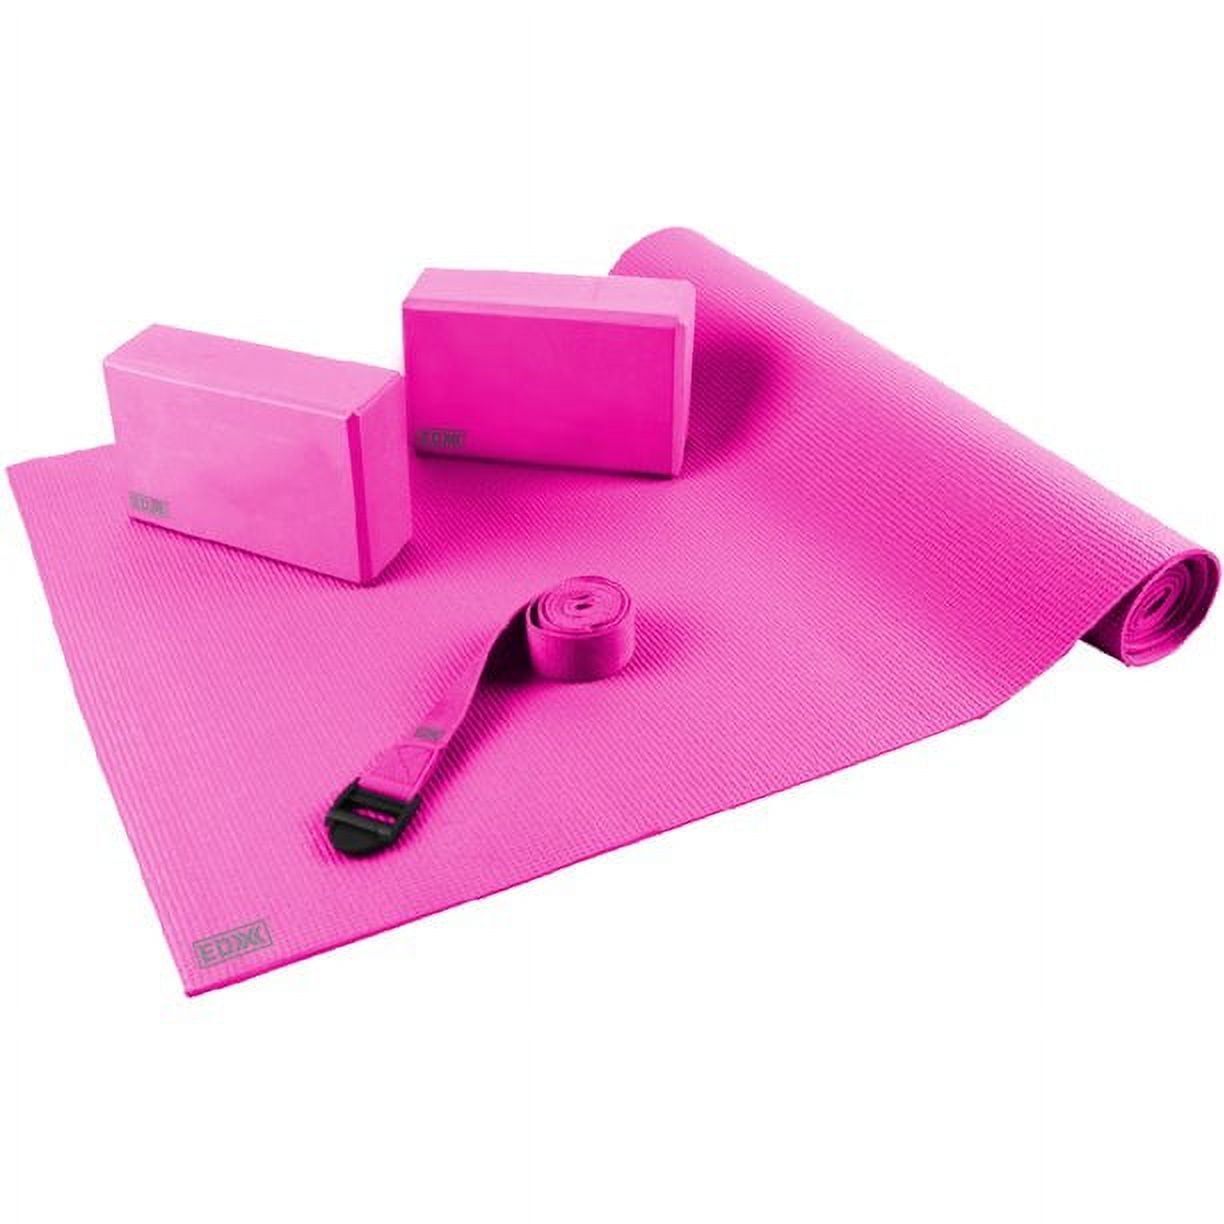 EDX Essential Yoga Kit with Mat, EVA Foam Blocks, Carrying Strap for  Pilates, Workouts, Exercise, Set of 4, Pink